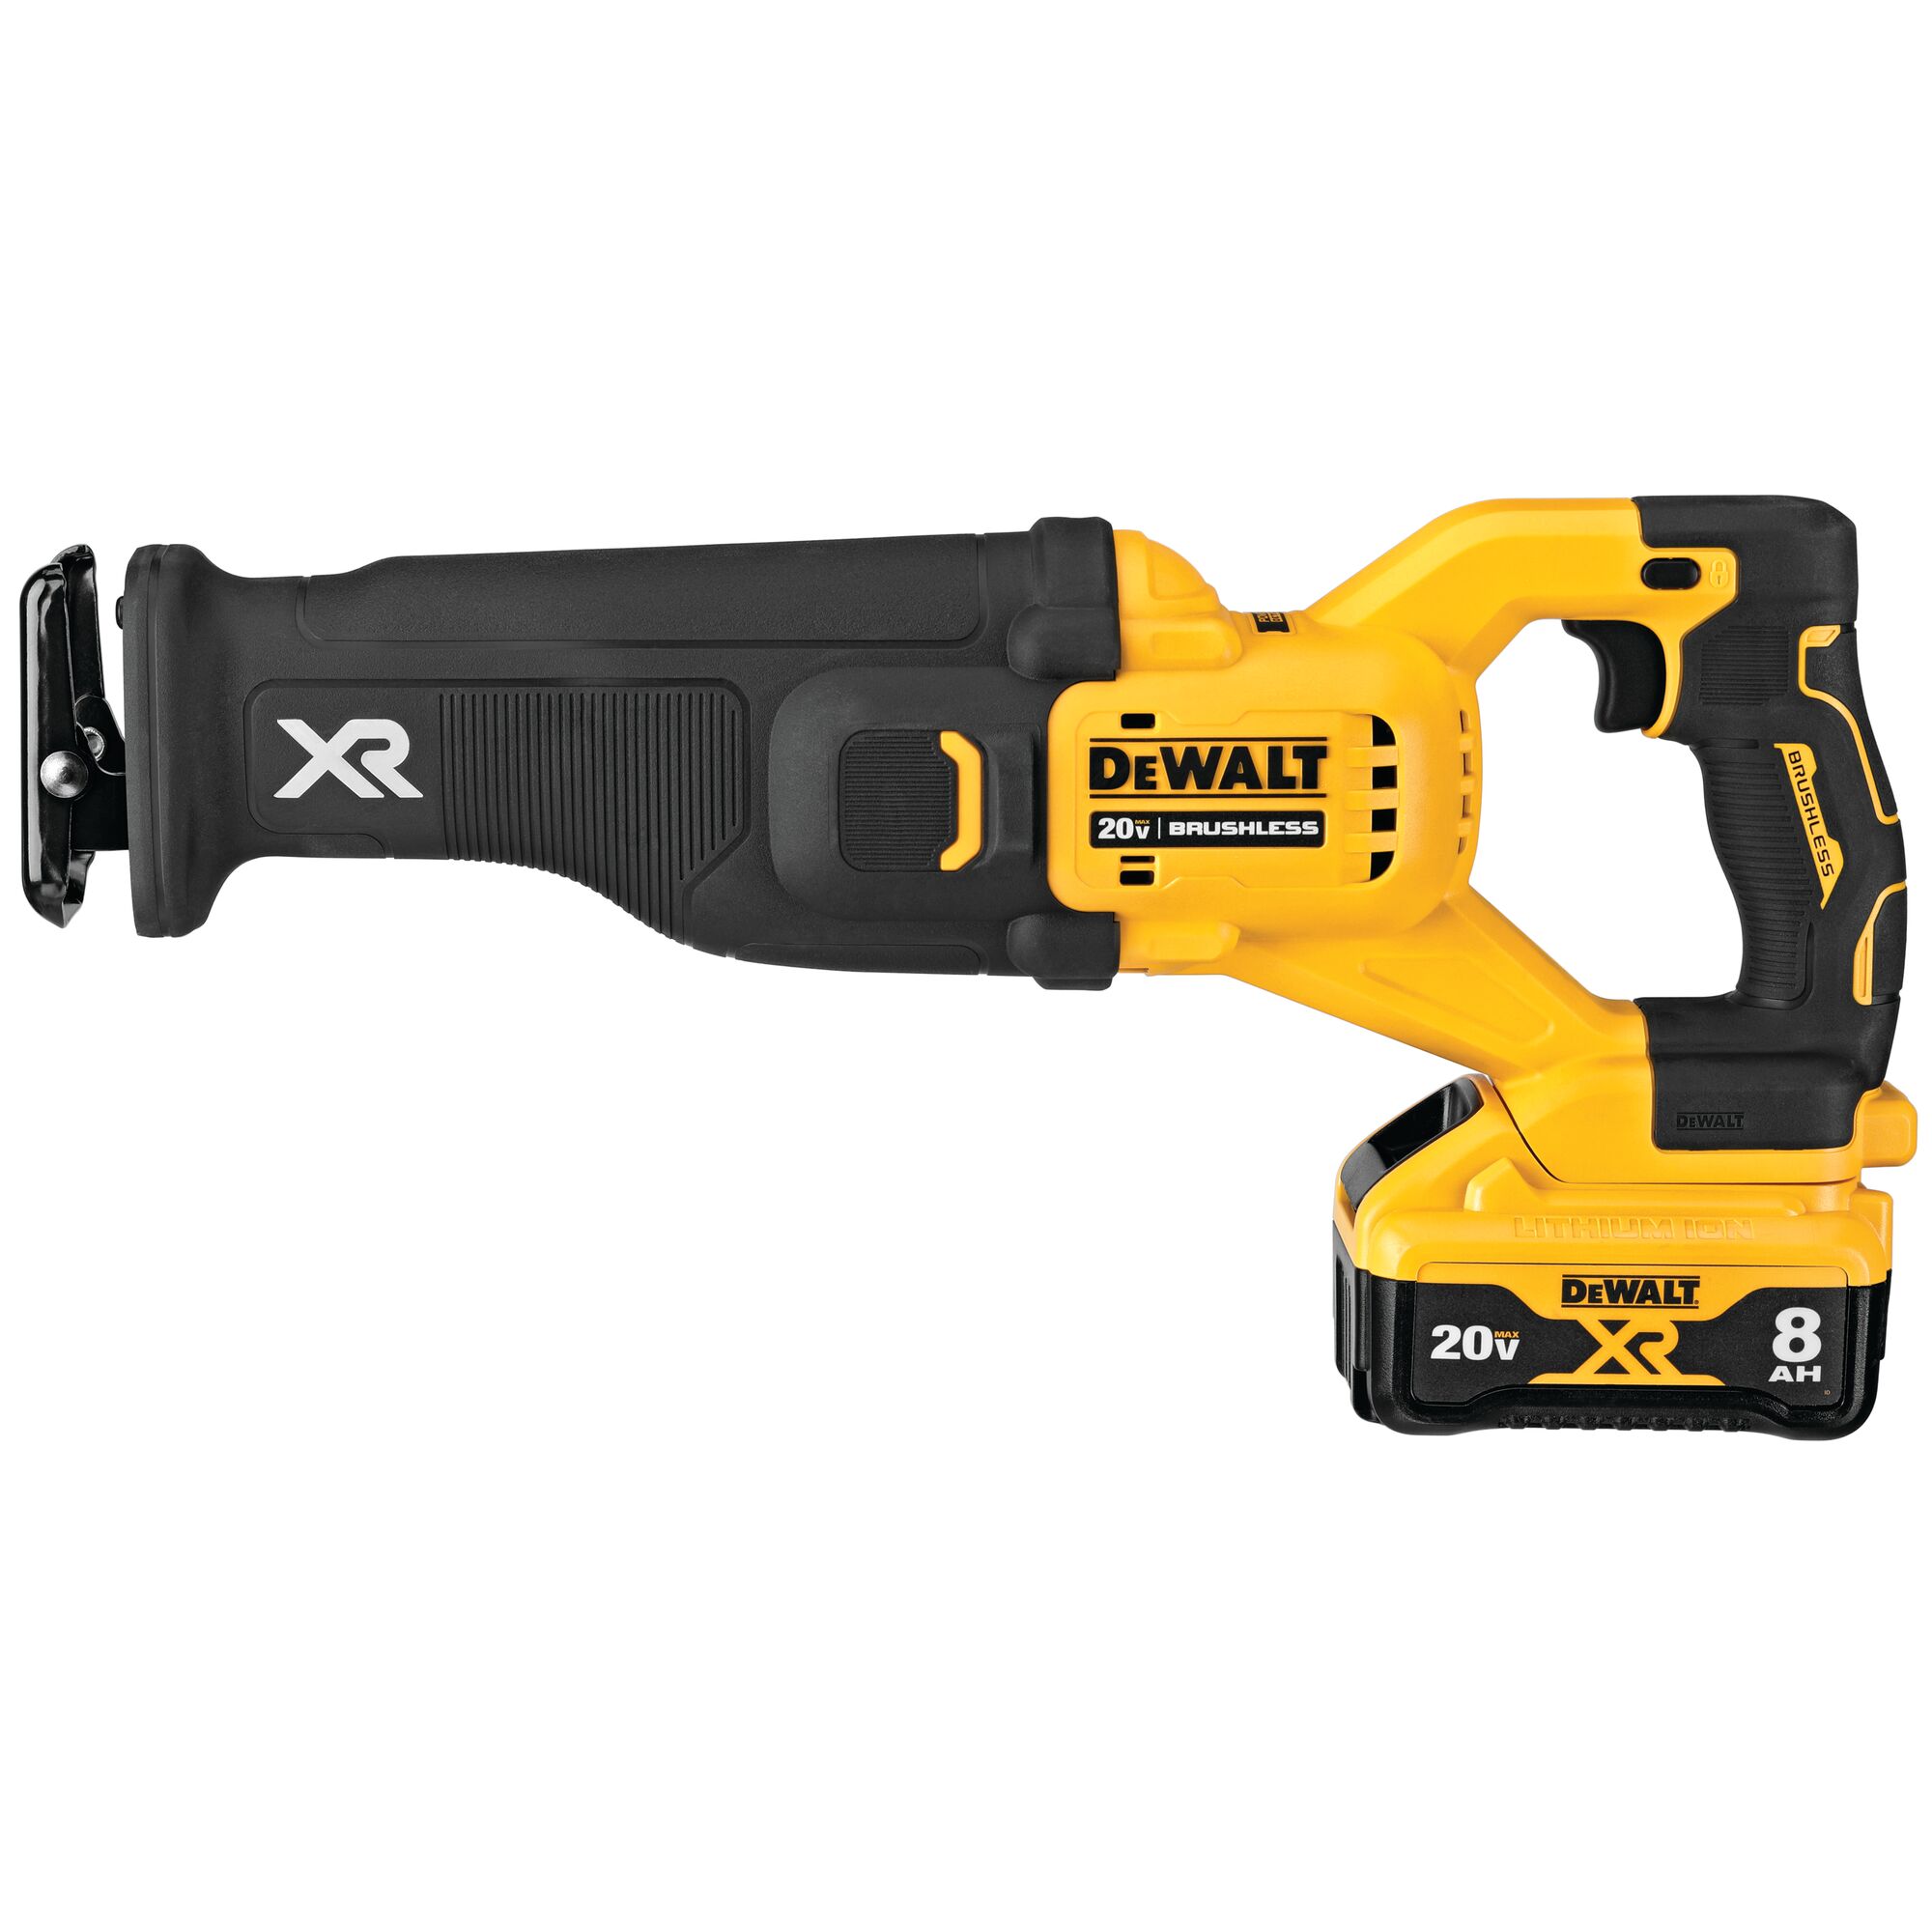 TOOL ONLY BRAND NEW DEWALT DCS368B XR BRUSHLESS RECIPROCATING SAW 